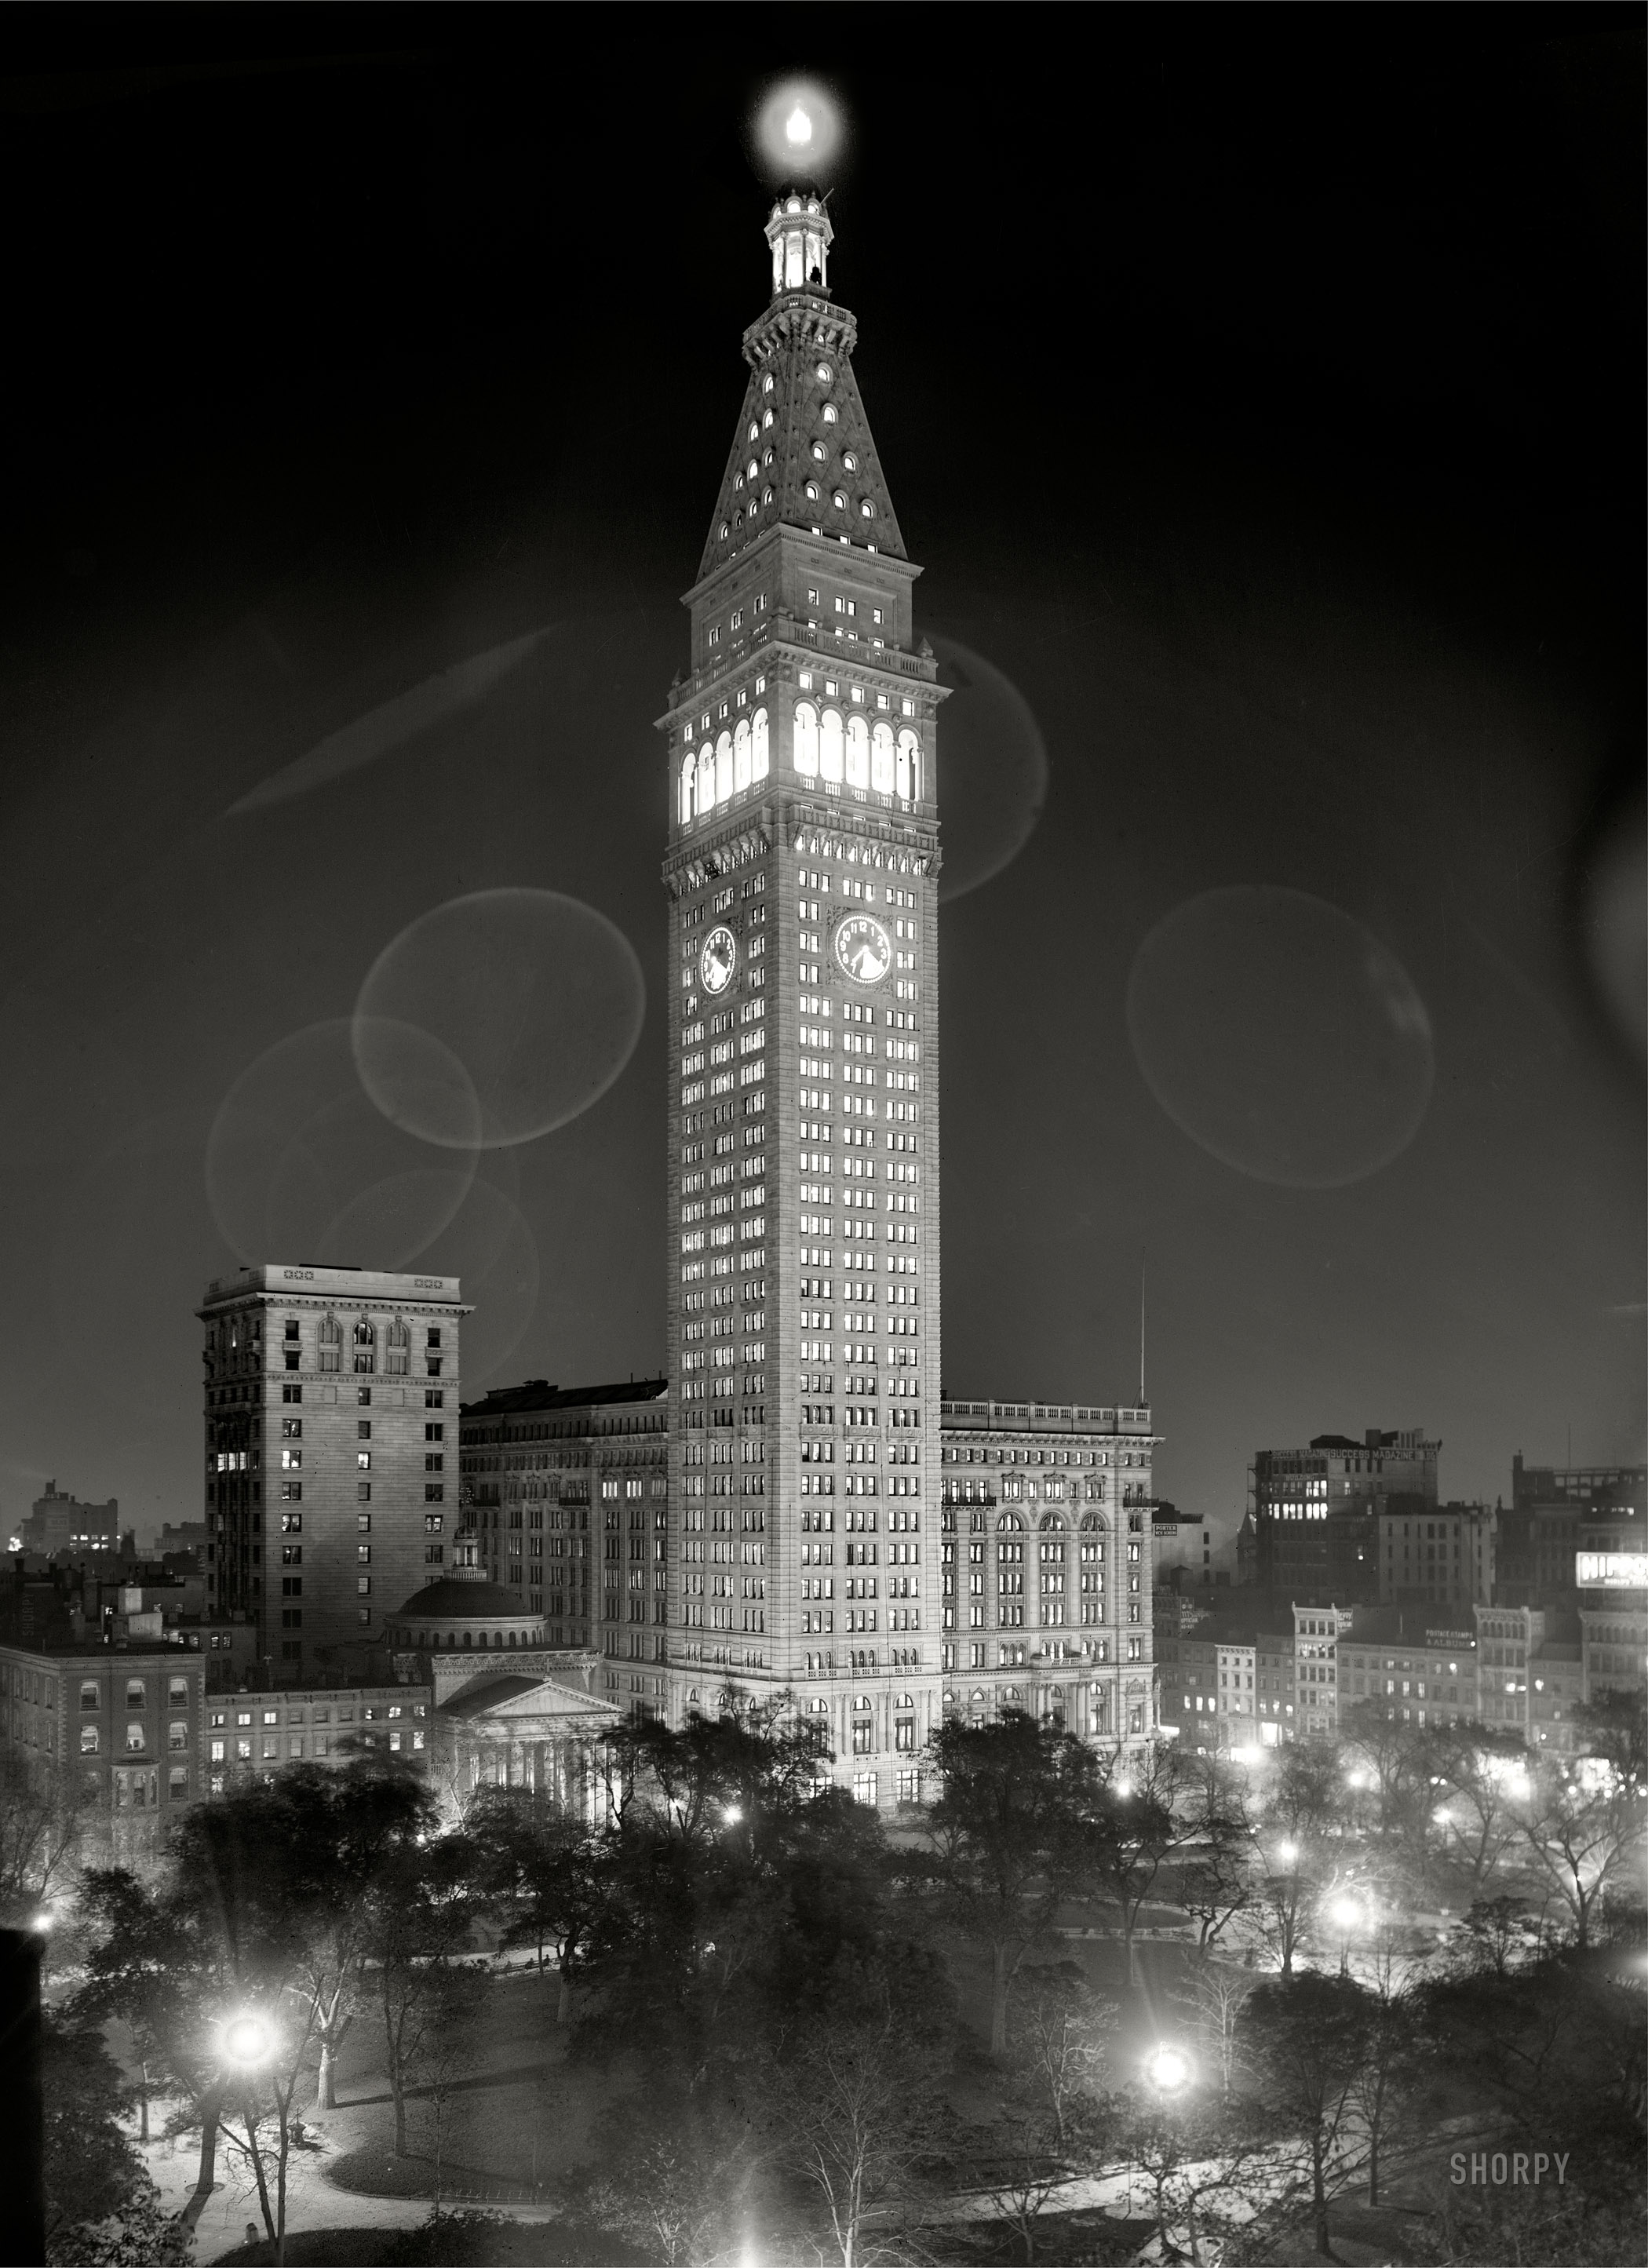 New York City circa 1910. "Metropolitan Life Insurance Company building at night." Note the 10-minute exposure time as recorded by the clock. 8x10 inch dry plate glass negative, Detroit Publishing Company. View full size.